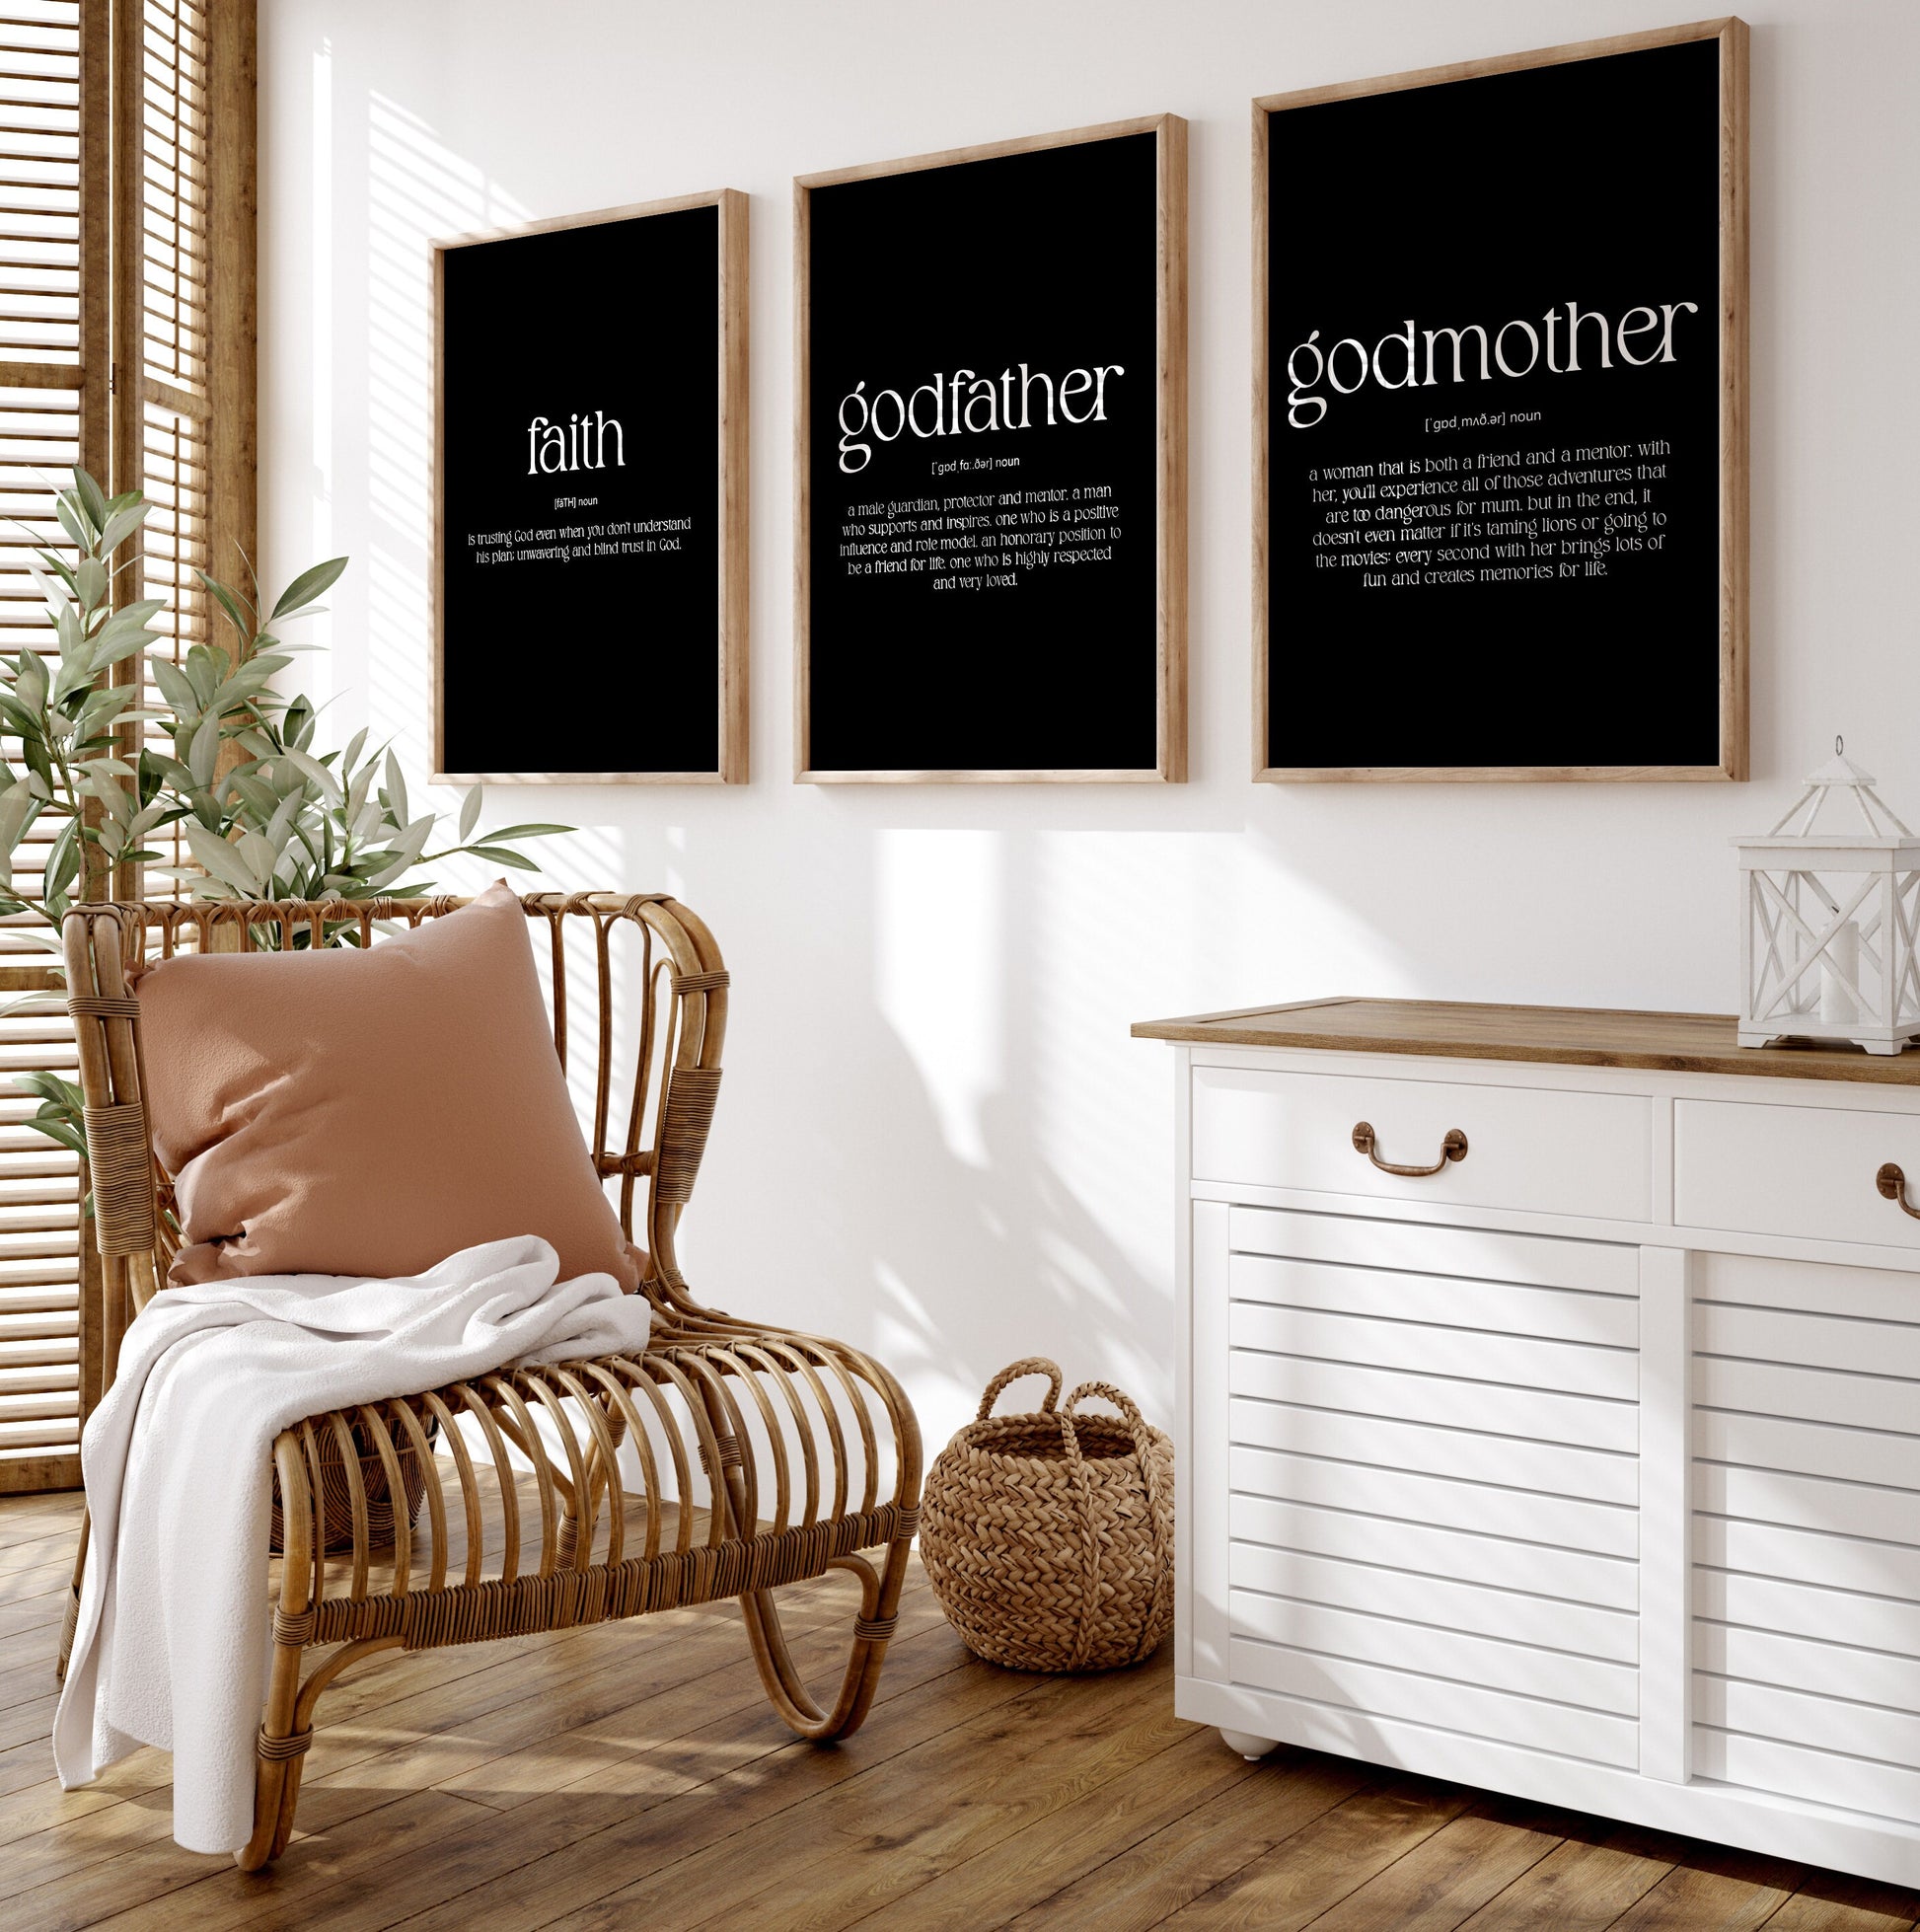 Godmother, Godfather, Faith Set Of 3 Definition Prints - Magic Posters